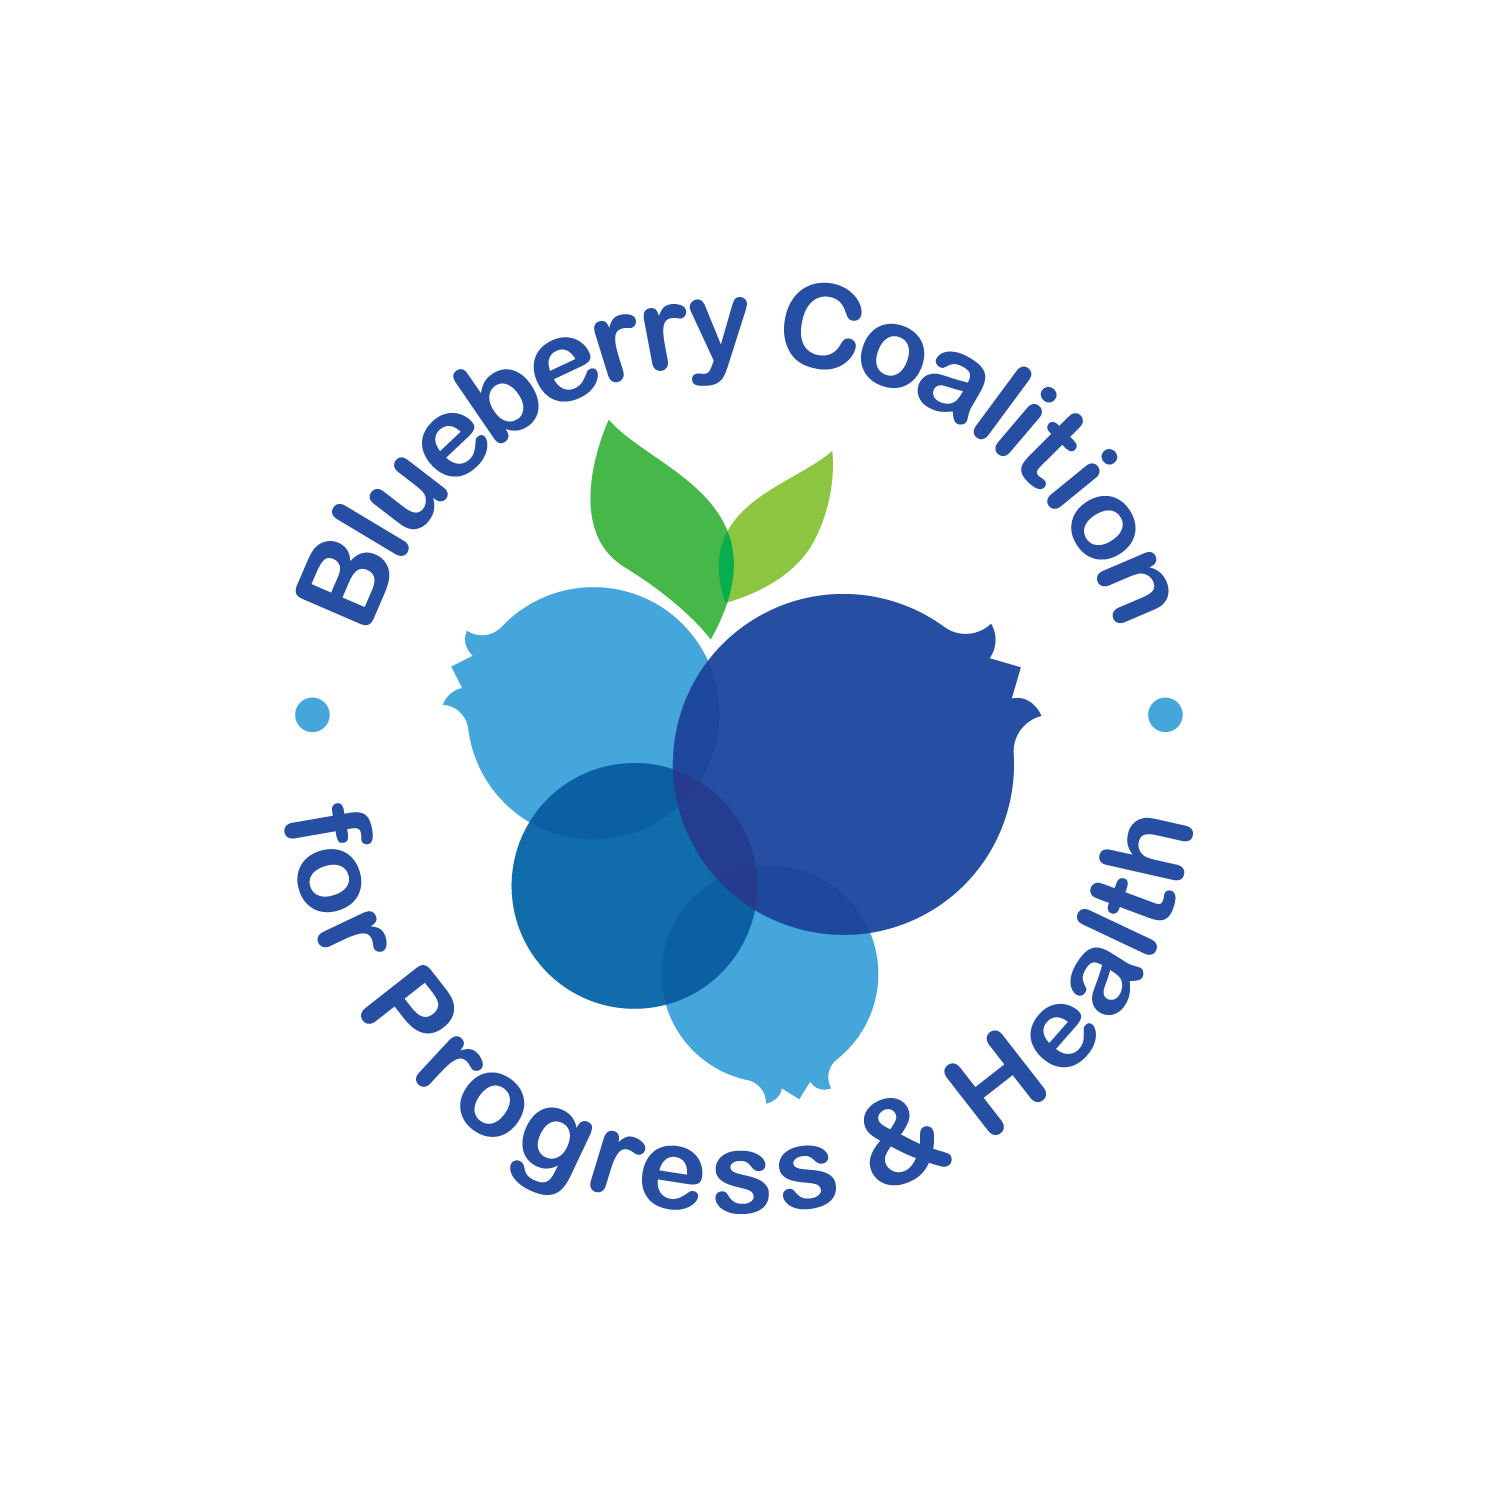 Blueberry Coalition for Progress and Health